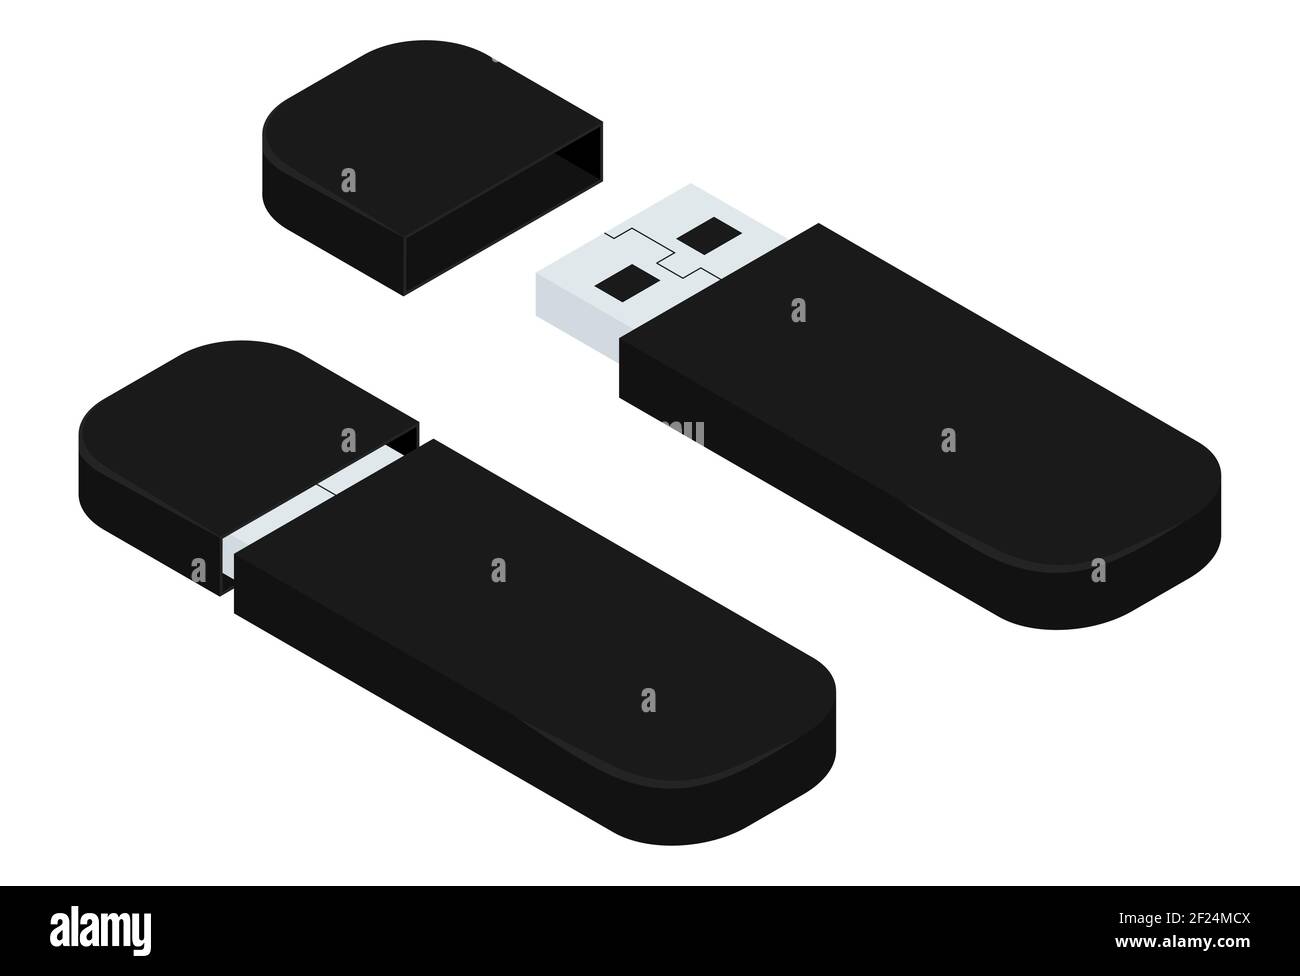 Black isometric USB flash-drives, open and closed. Vector illustration isolated on white. Stock Vector